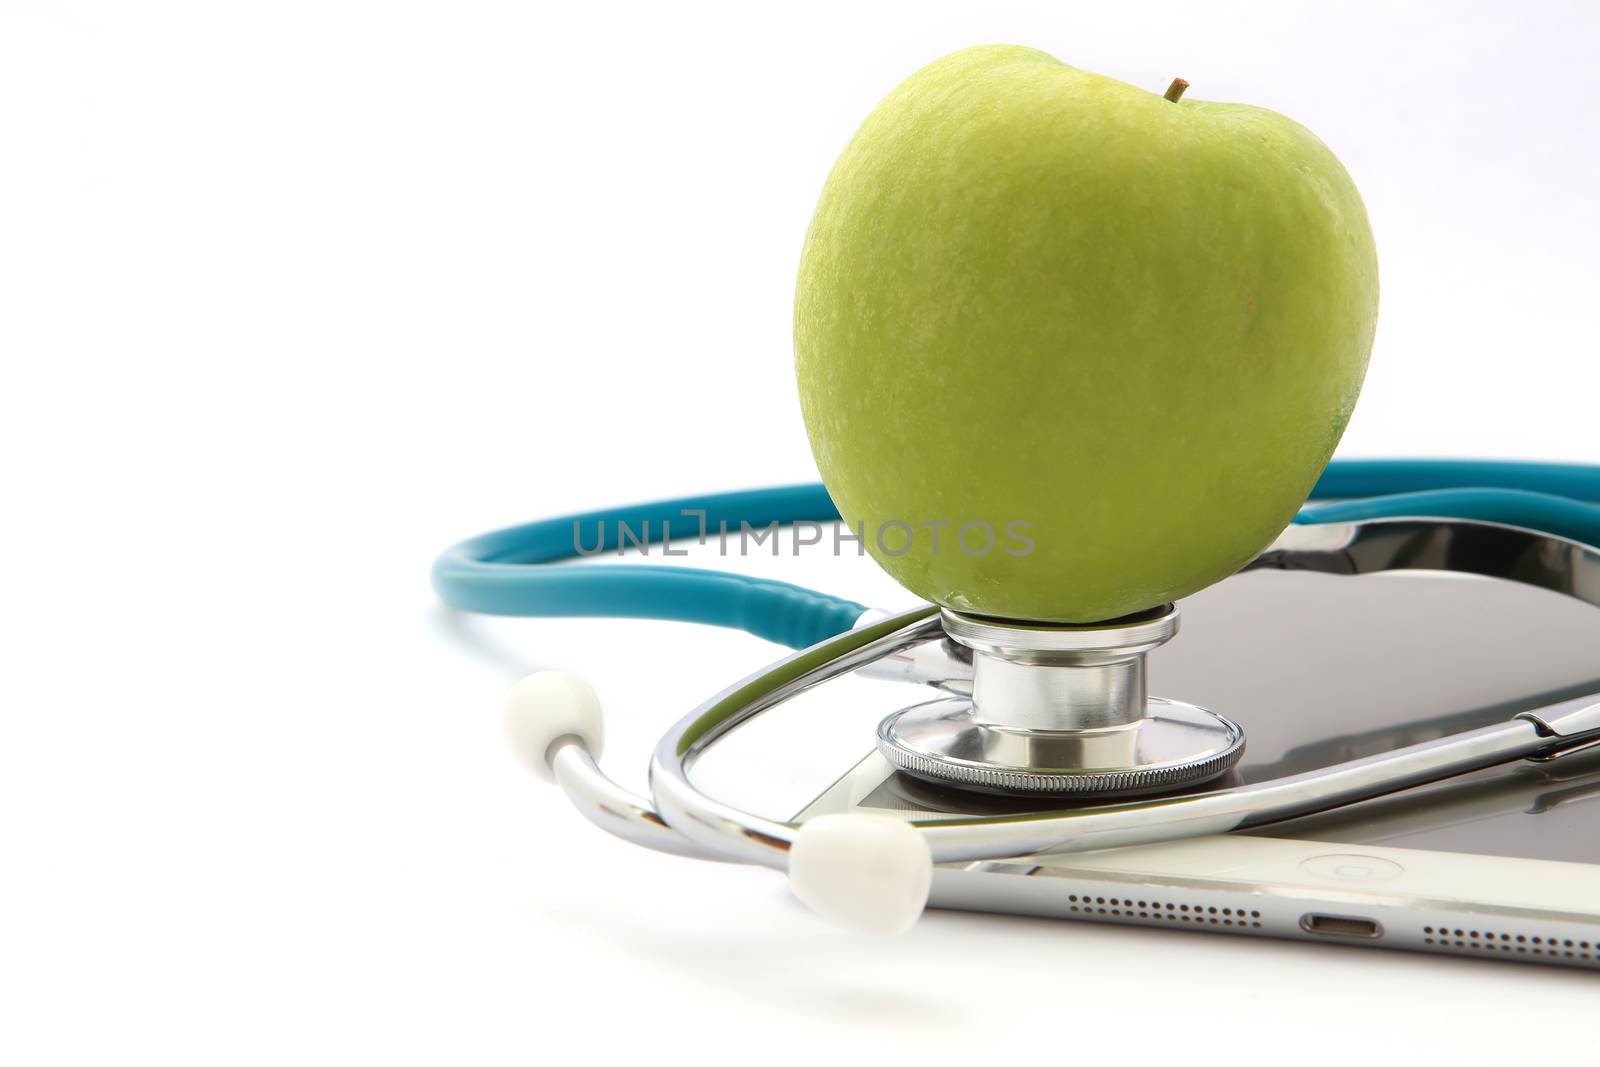 Stethoscope and green apple isolated on Tablet